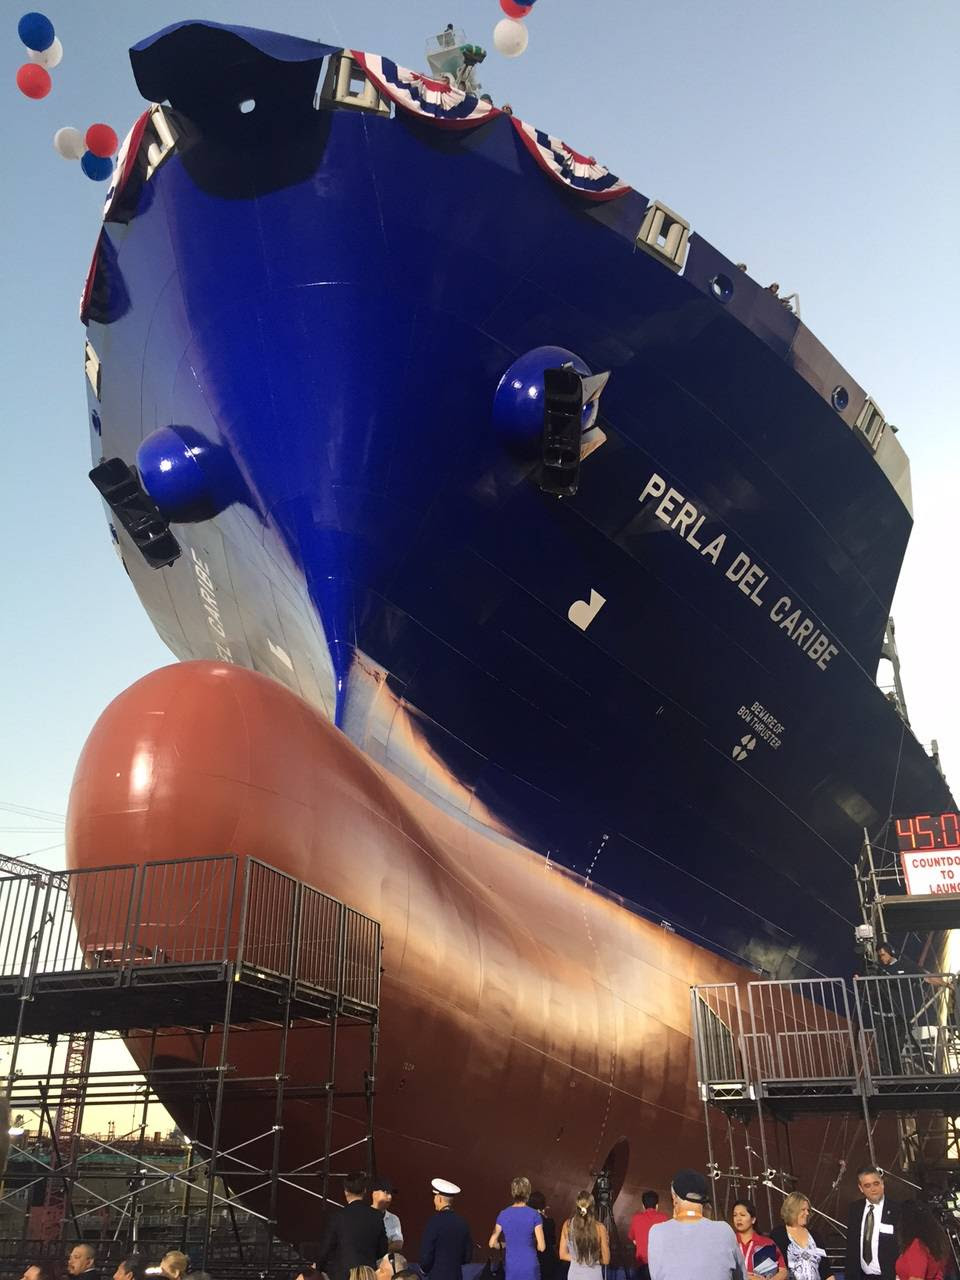 LNG-fueled containership built this year by General Dynamics NASSCO shipyard in San Diego for the shipping company TOTE. Launched August 29, 2015